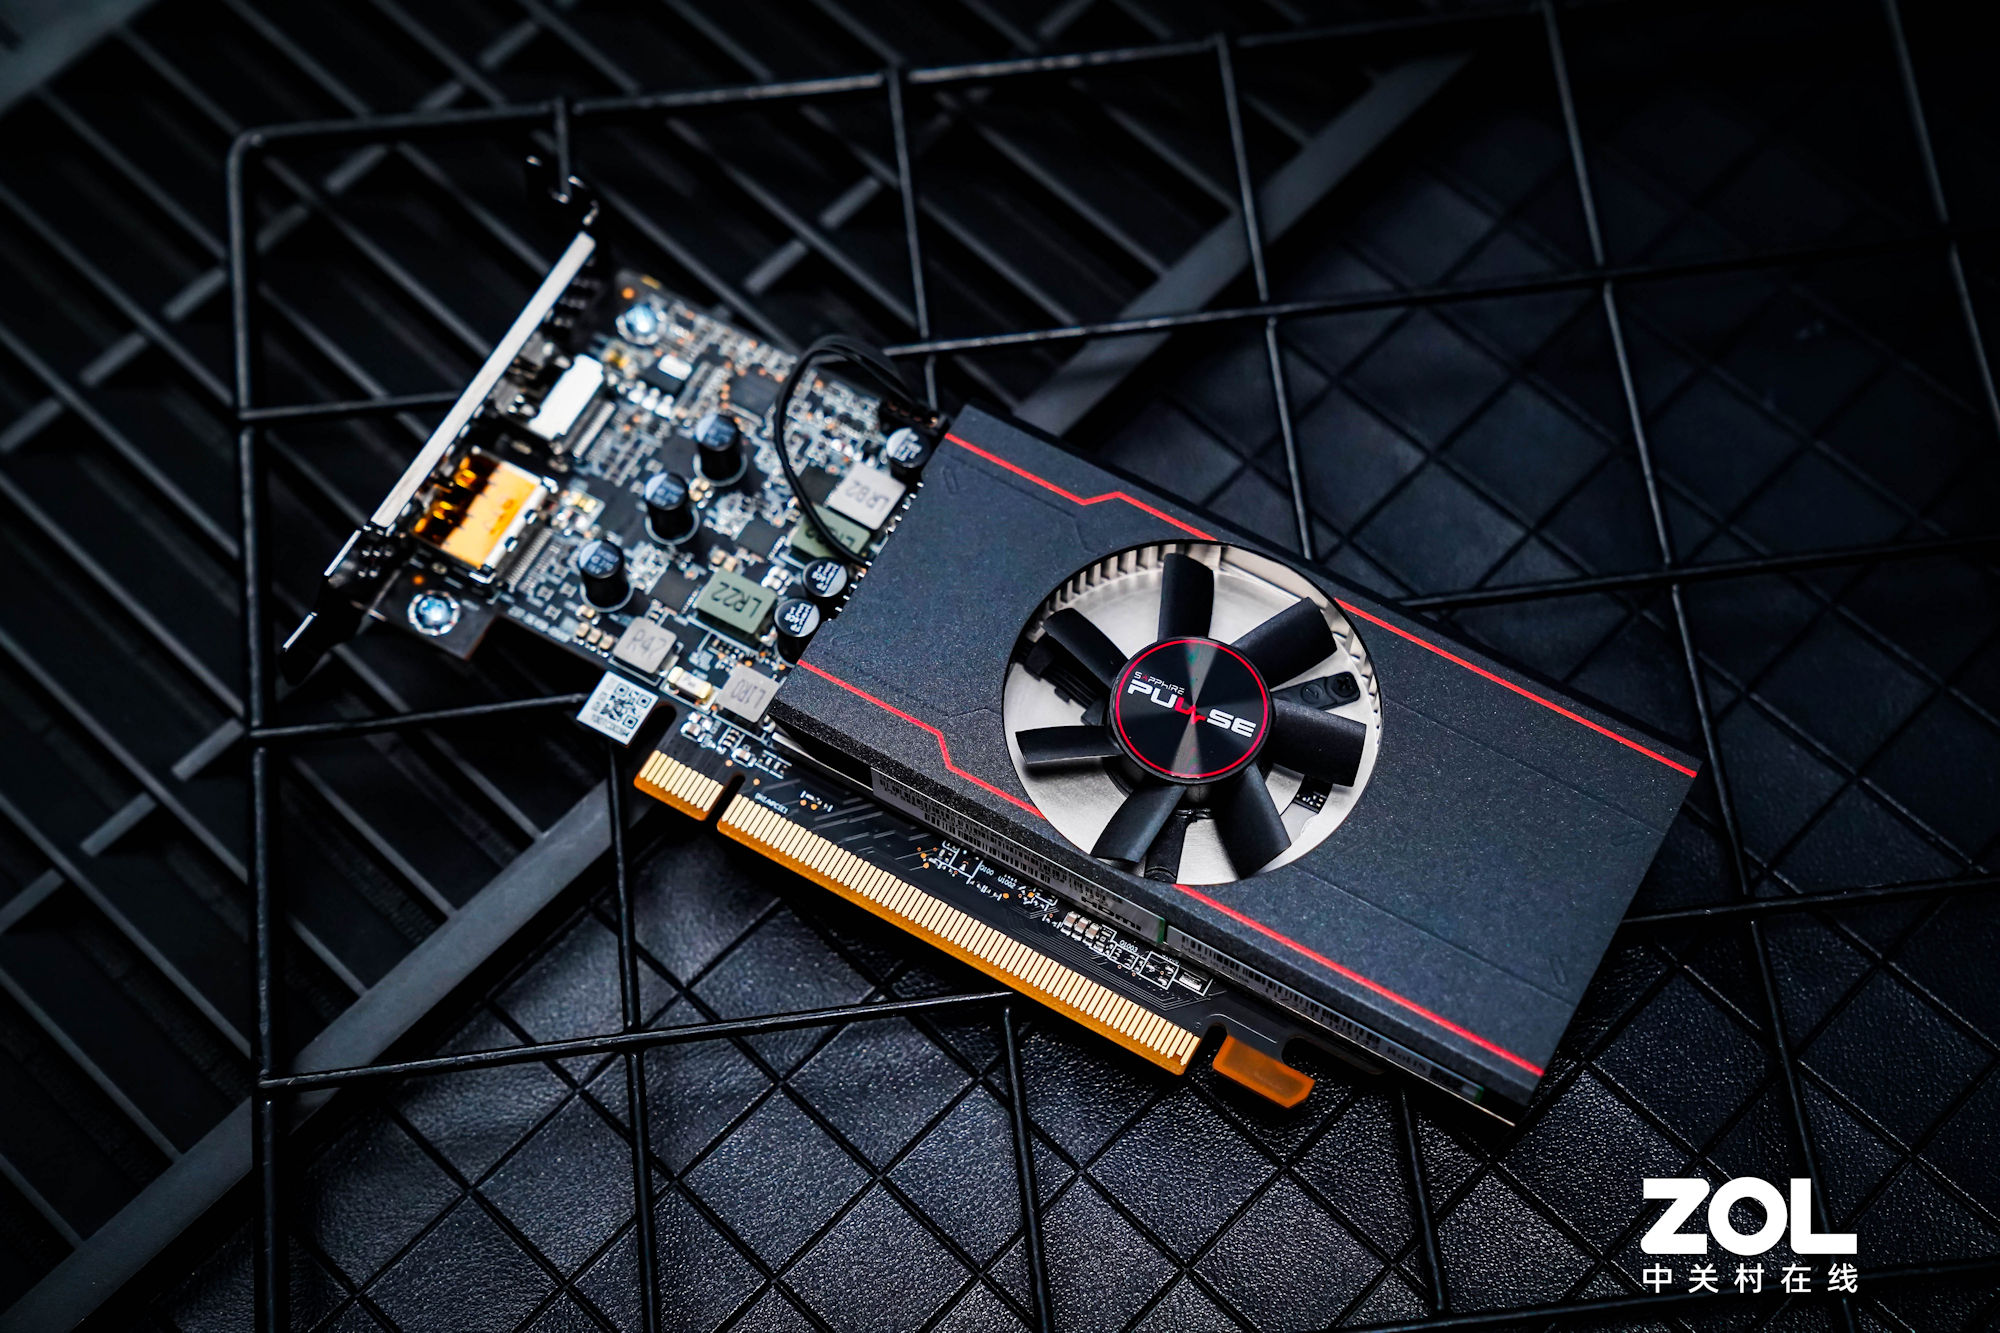 AMD launches Radeon RX 6400 low-power RDNA2 graphics card at 159